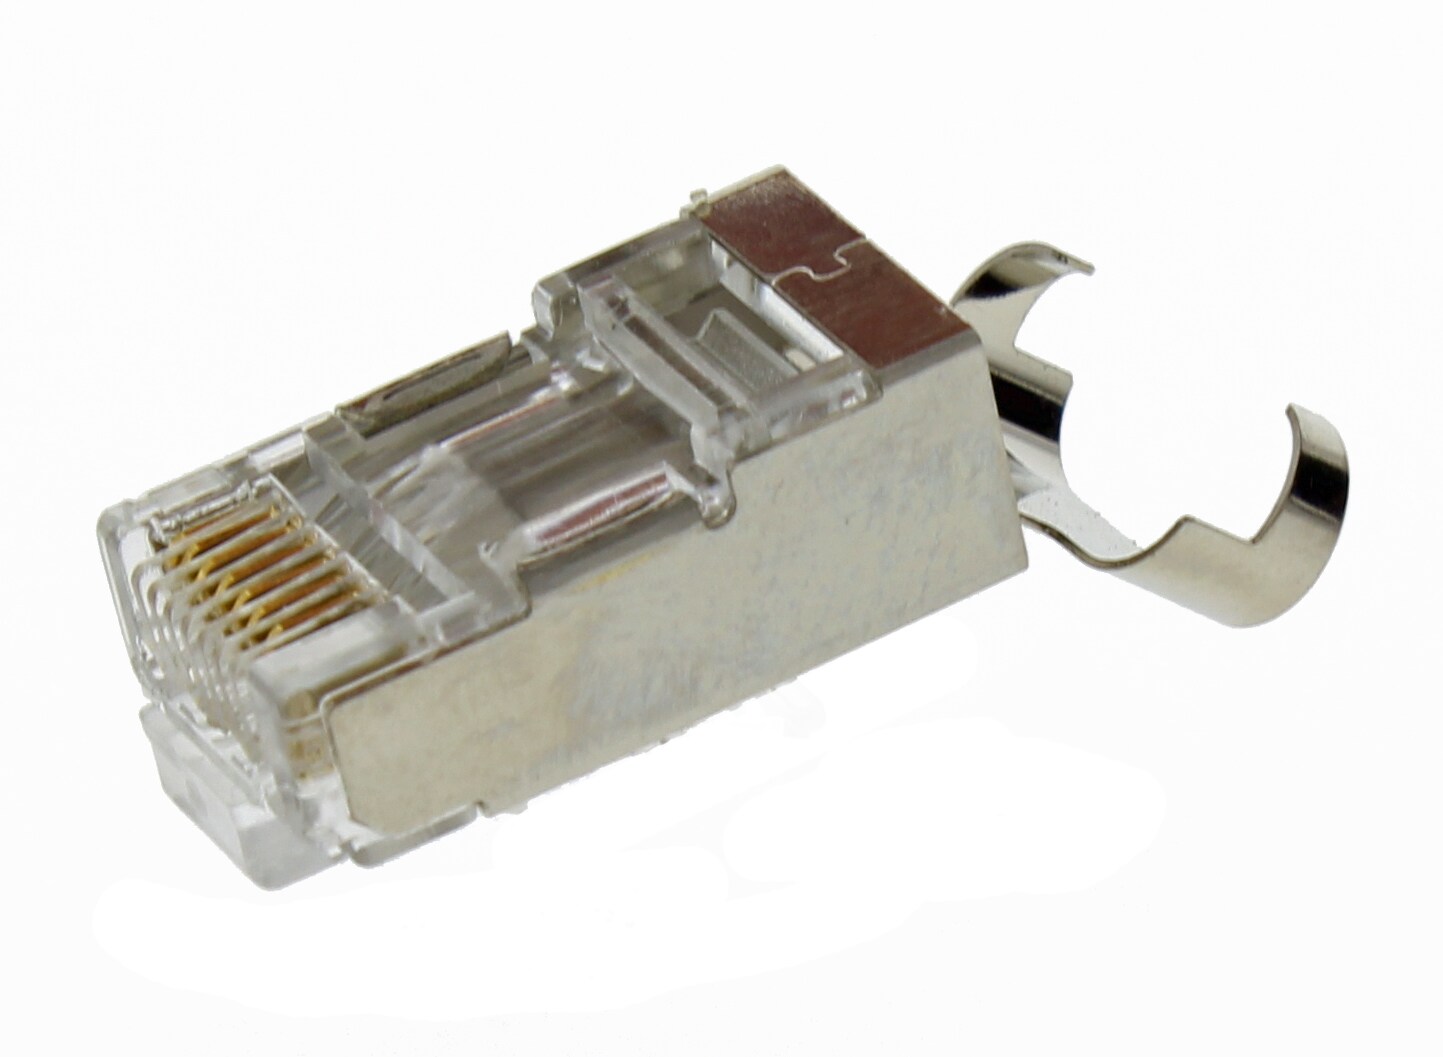 CAT6A/6 Feed-Thru RJ-45 for 0.048 Max. Conductors